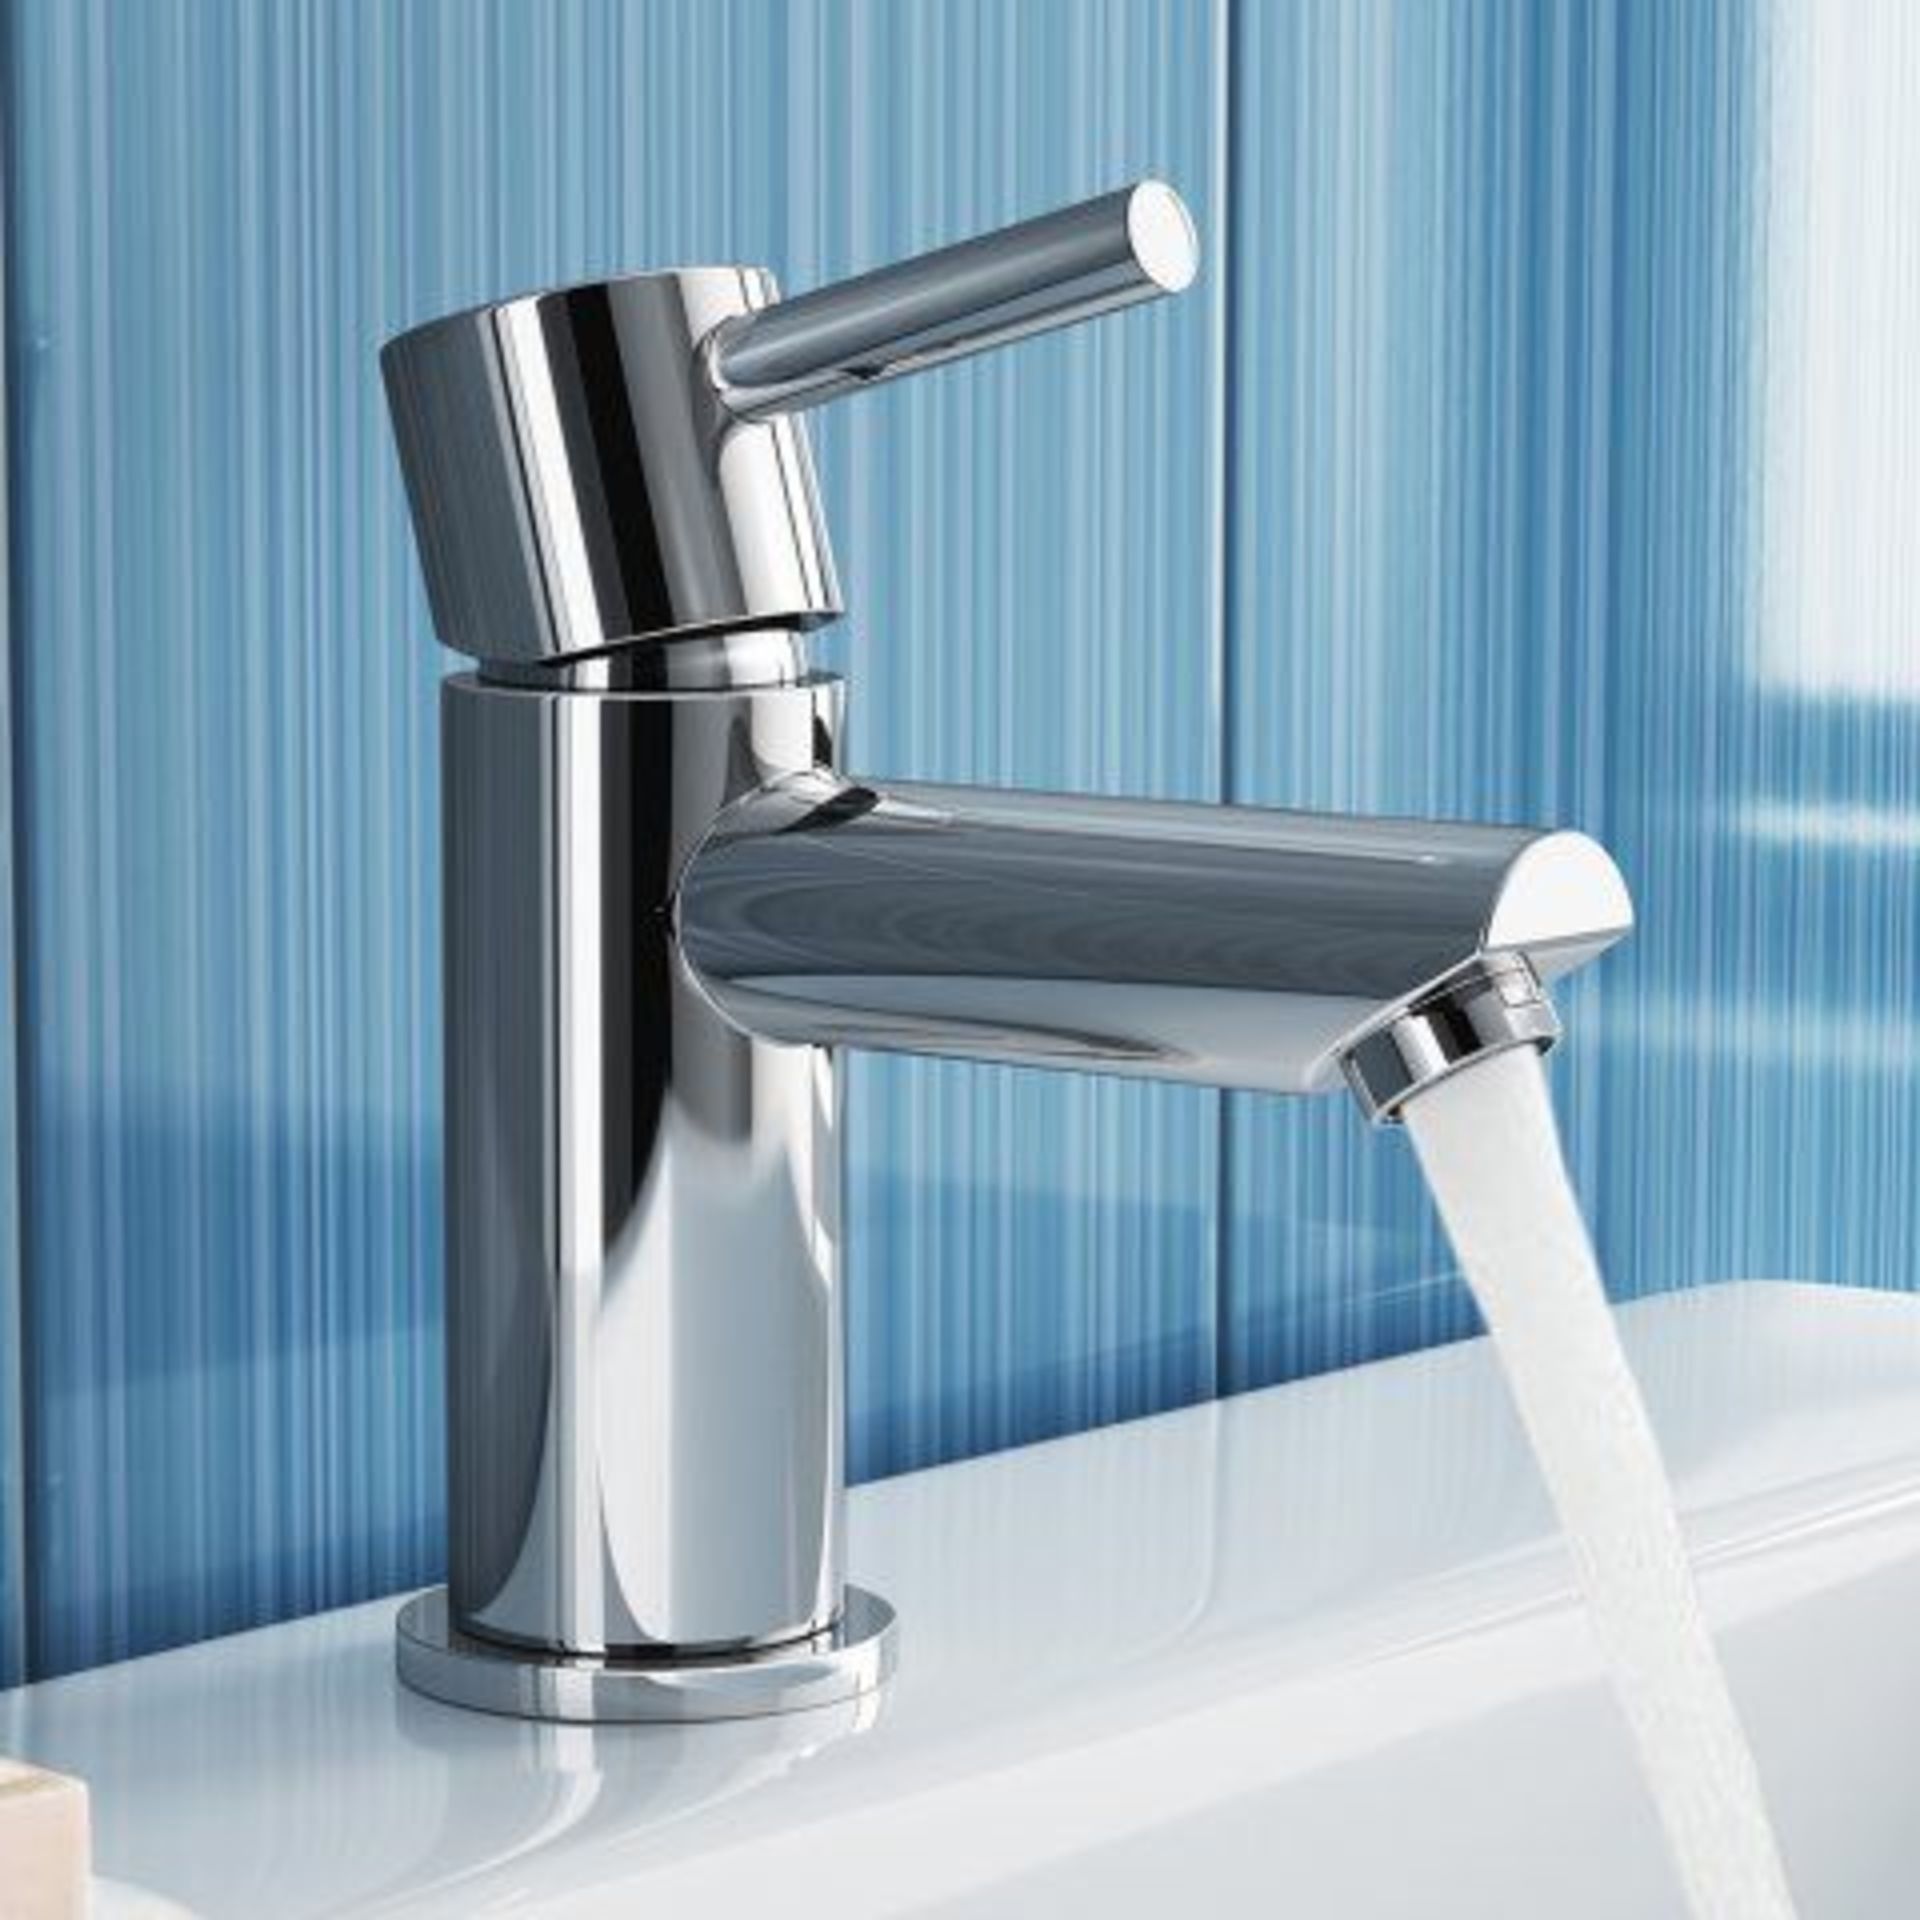 New & Boxed Gladstone Basin Mixer Tap. Tb2013.Chrome Plated Solid Brass Mirror Finish Simple In...